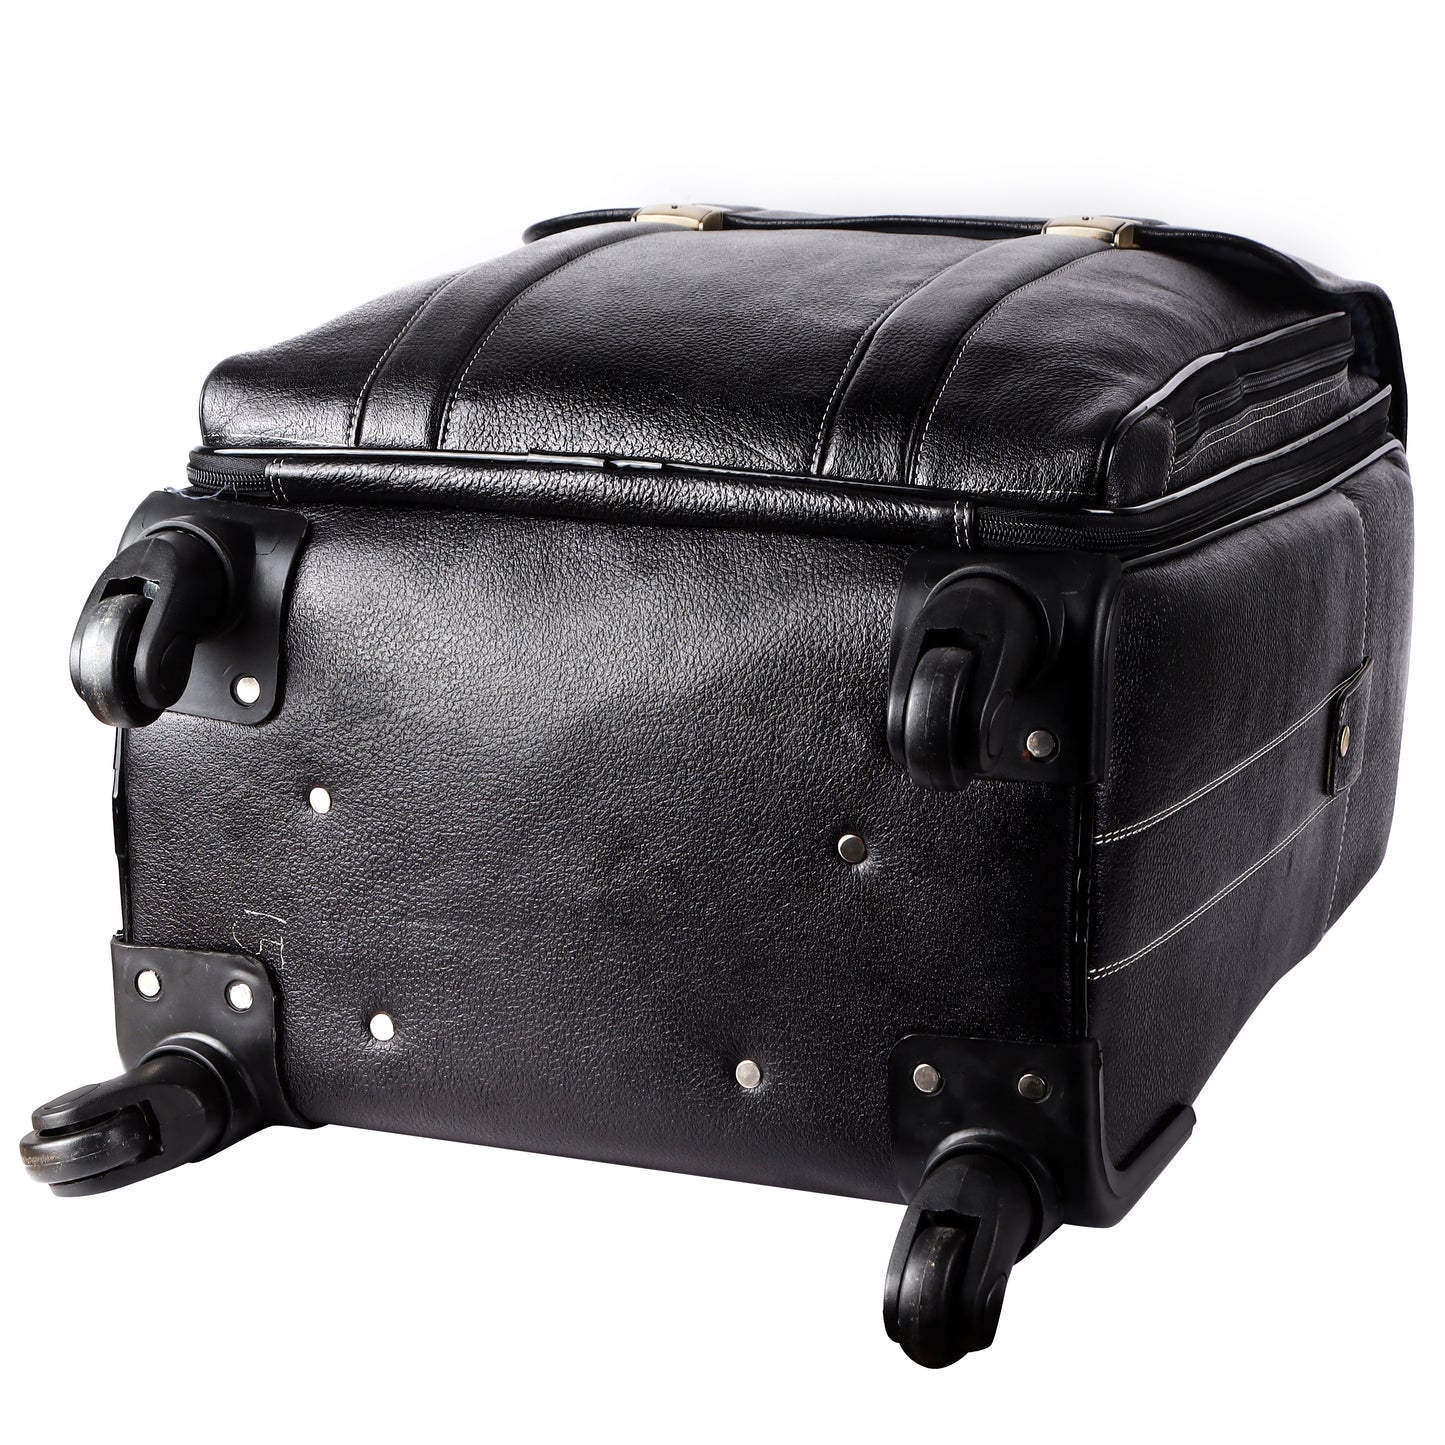 Black Leather Trolley Bag for Flight Leather Weekender Leather Luggage with Wheels